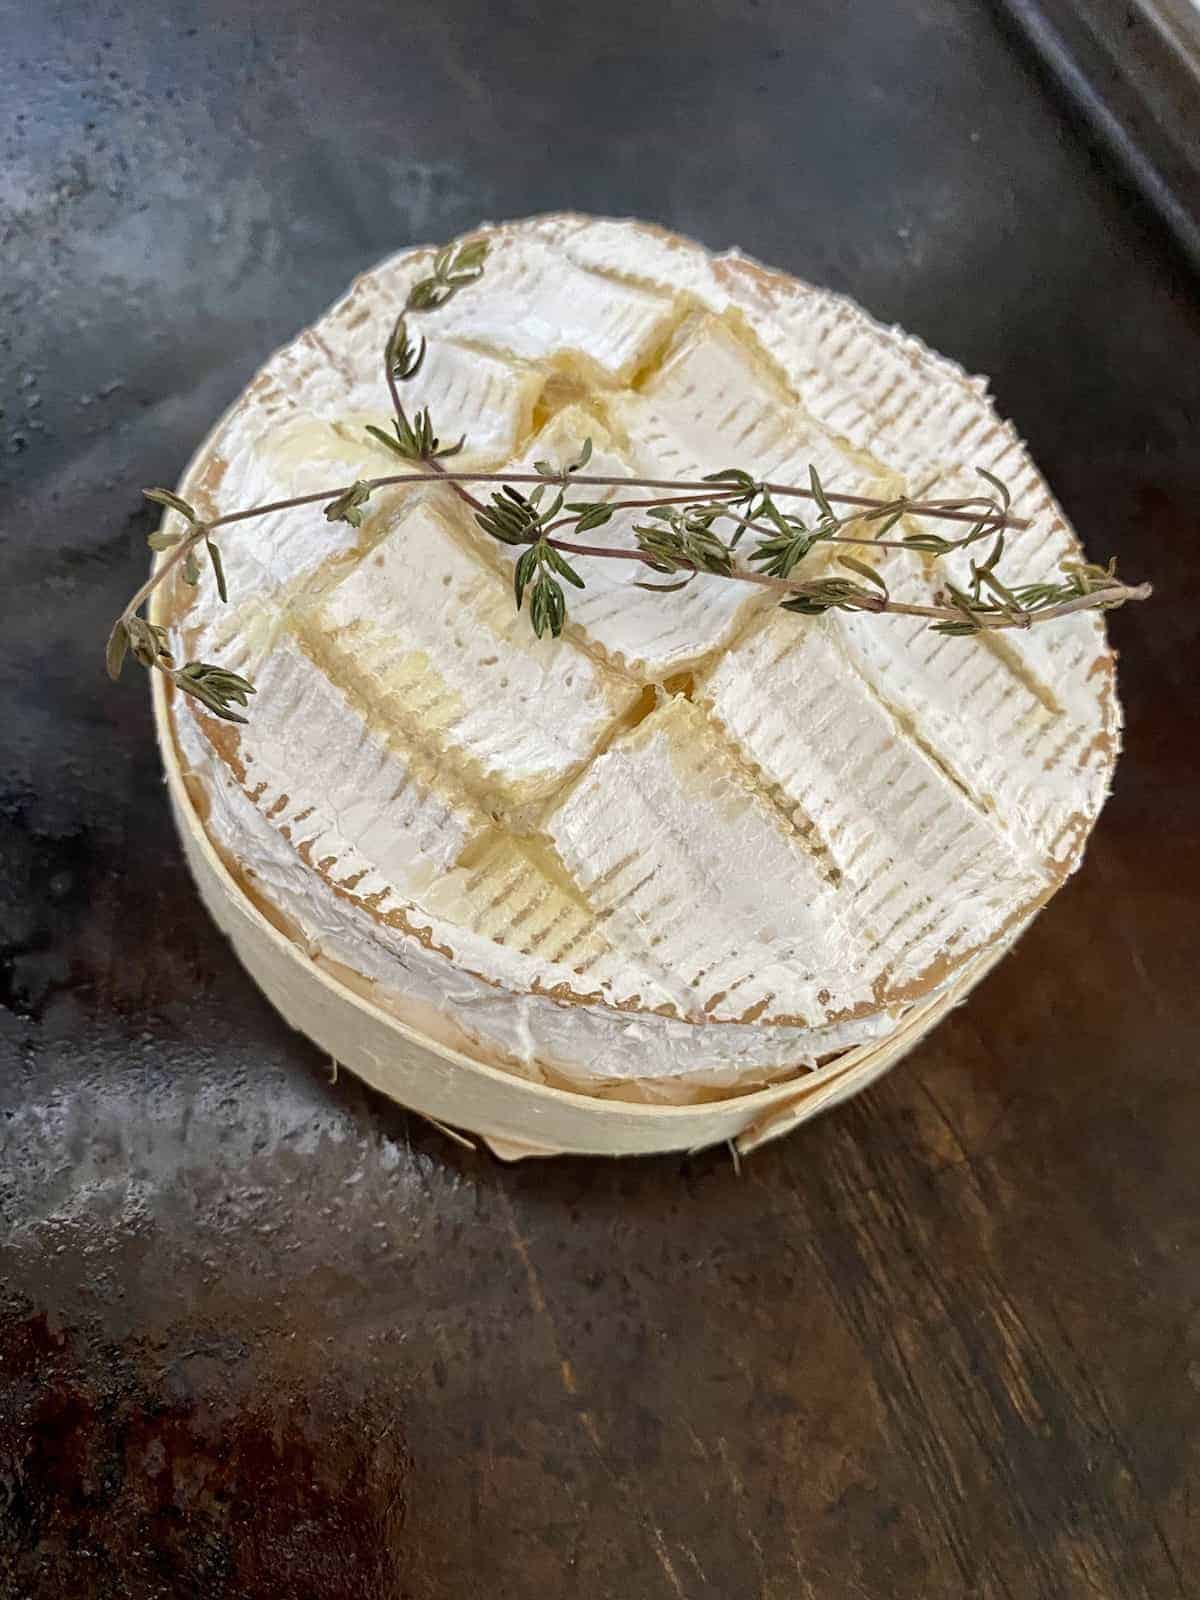 Bake the camembert in the oven on a tray 